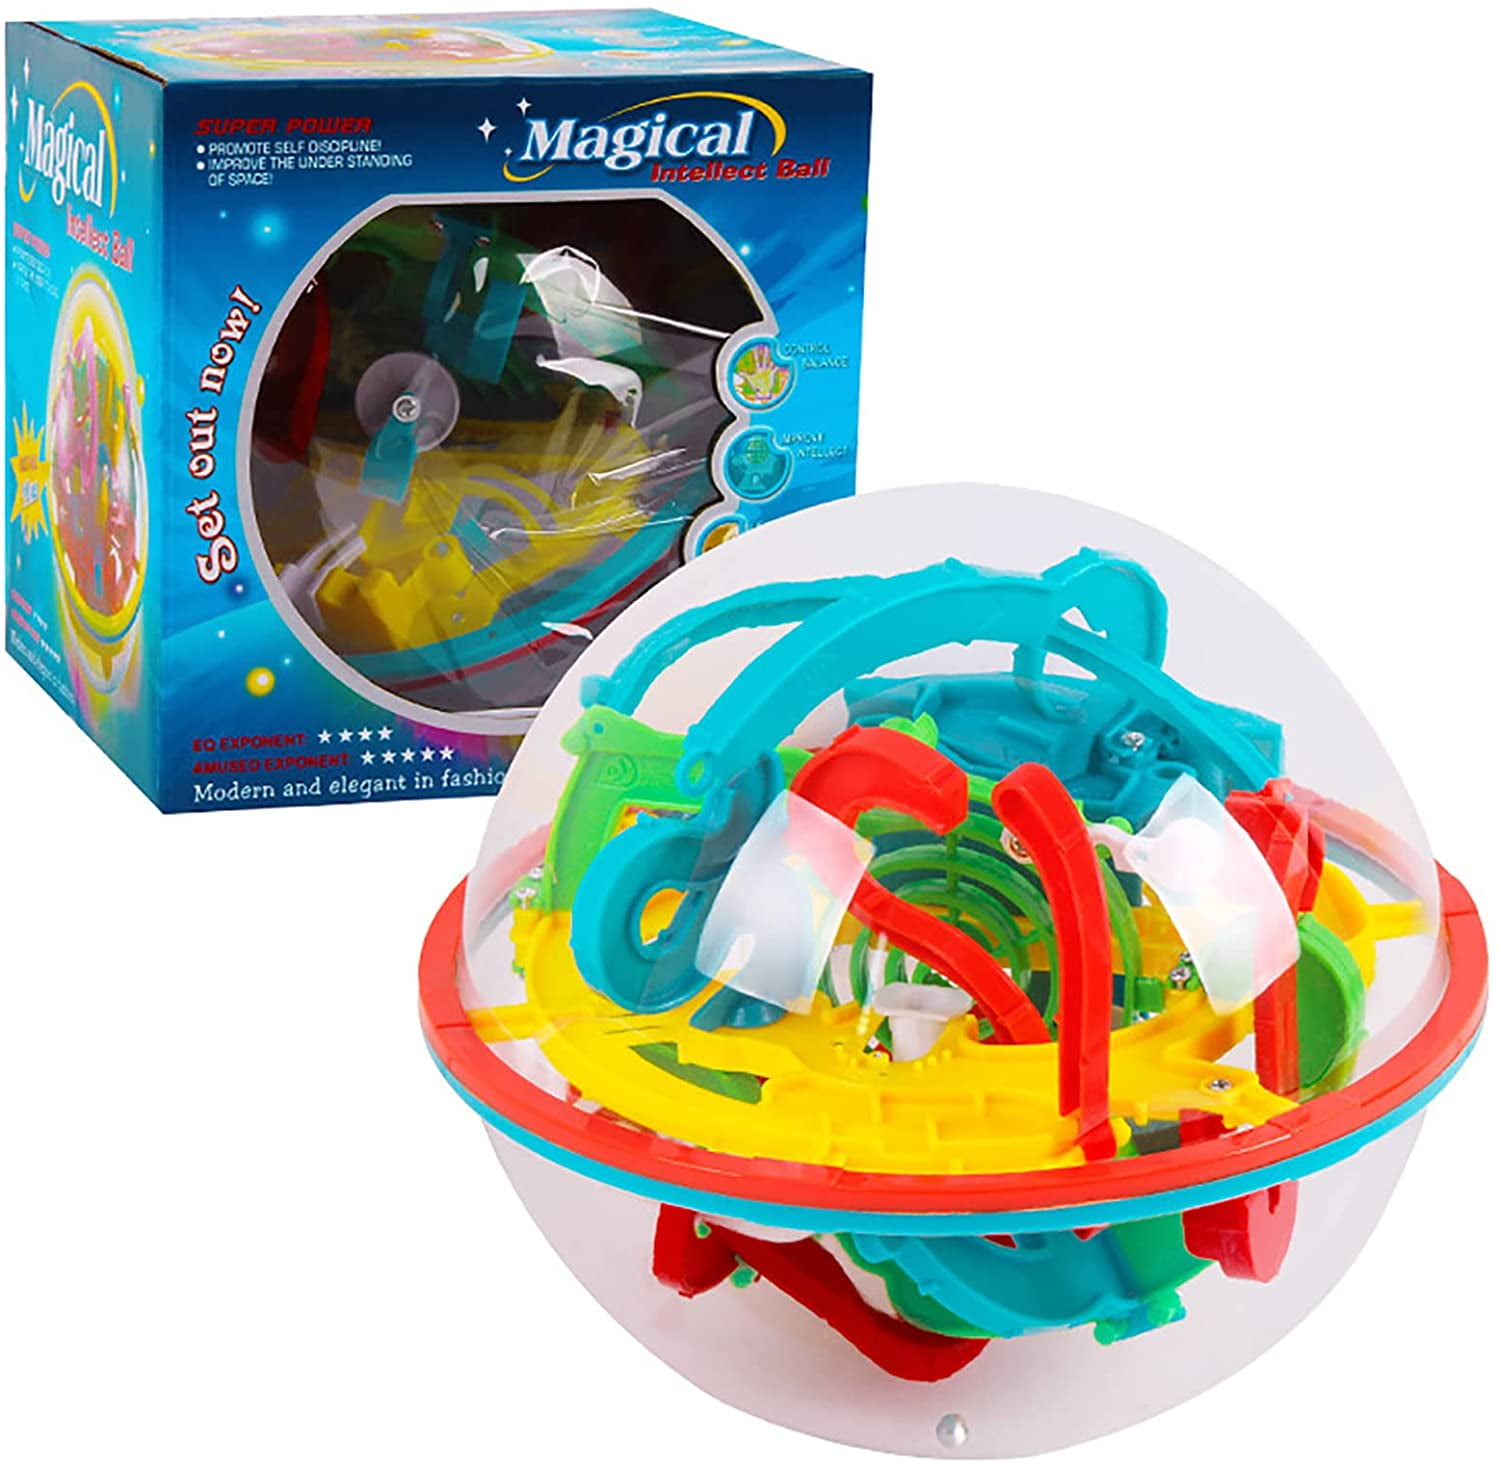 118 Barriers Magic 3D Intellect Ball Balance Maze Game Puzzle Globe Toy Gift 